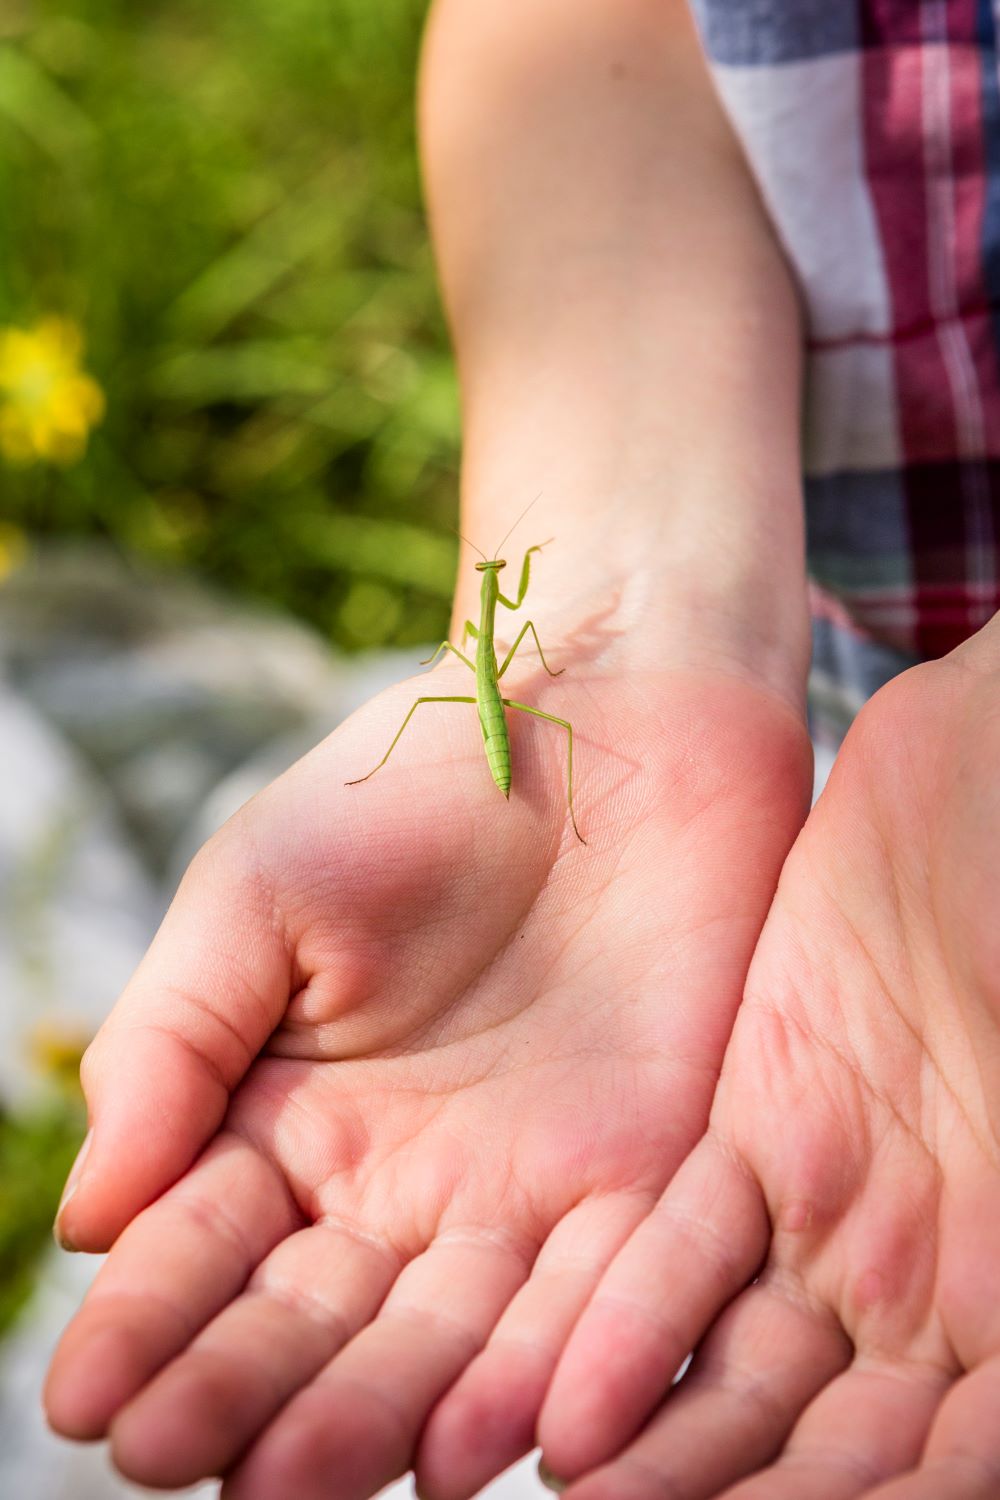 Kid holding a praying mantis in his cupped hands.